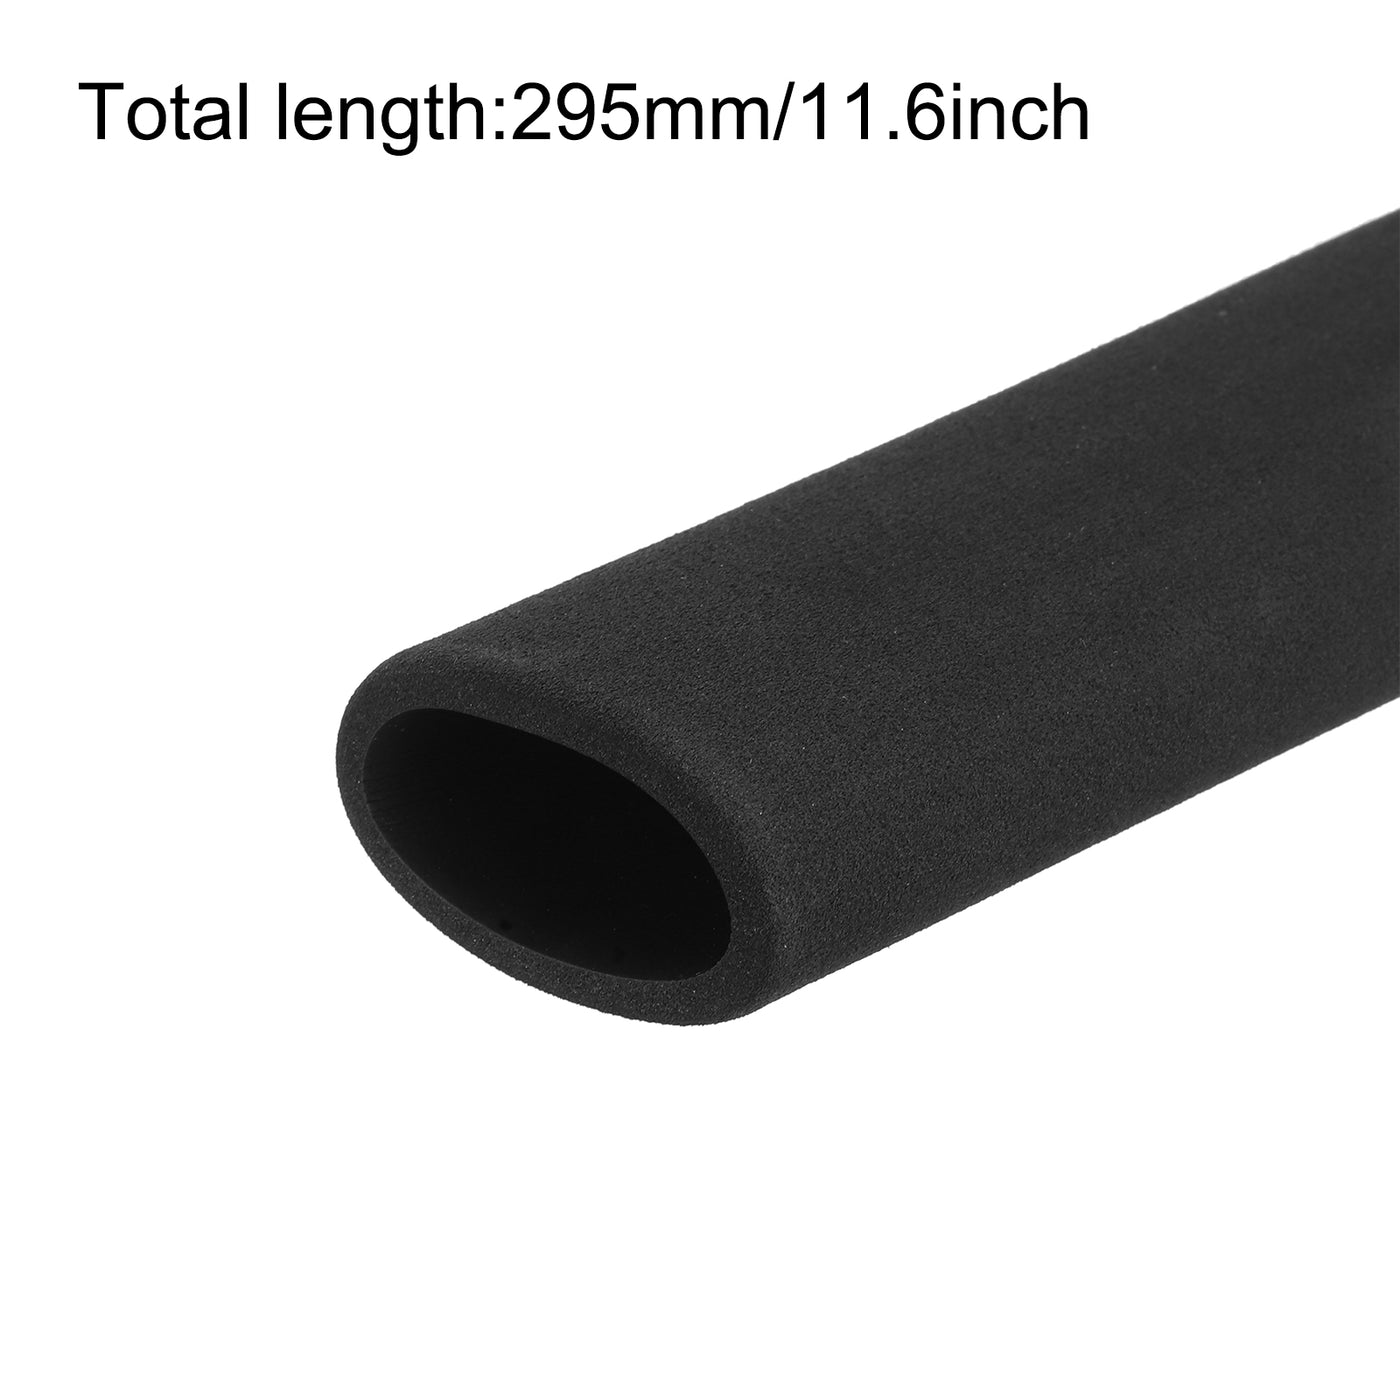 uxcell Uxcell Pipe Insulation Tube Foam Tubing for Handle Grip Support 35mm ID 45mm OD 295mm Heat Preservation Black